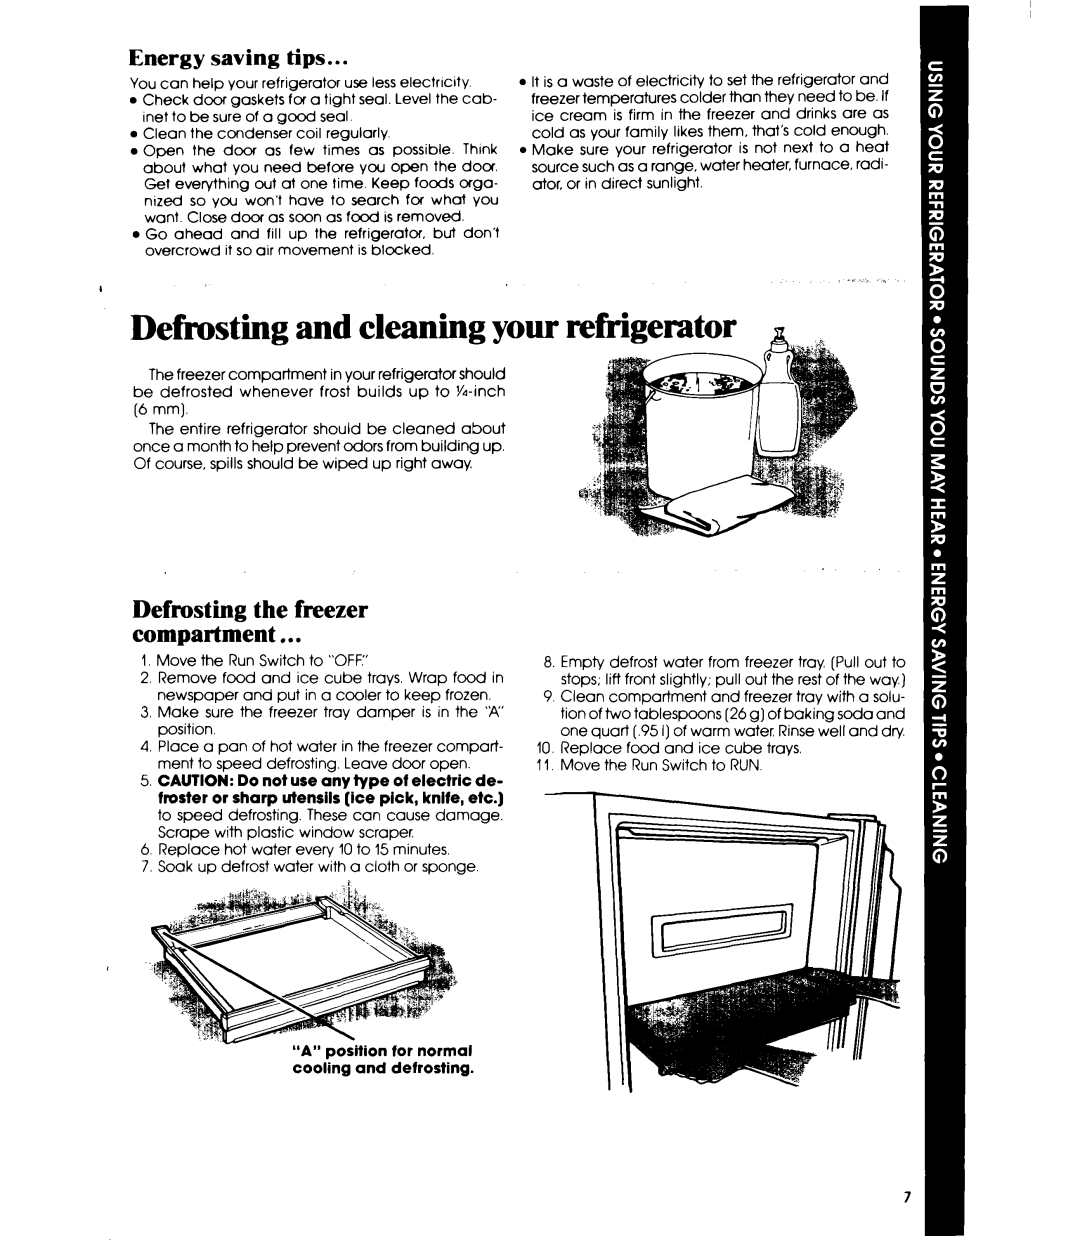 Whirlpool EL11PC manual Defrosting and cleaning your refrigerator, Energy saving tips, Defrosting the freezer compartment 